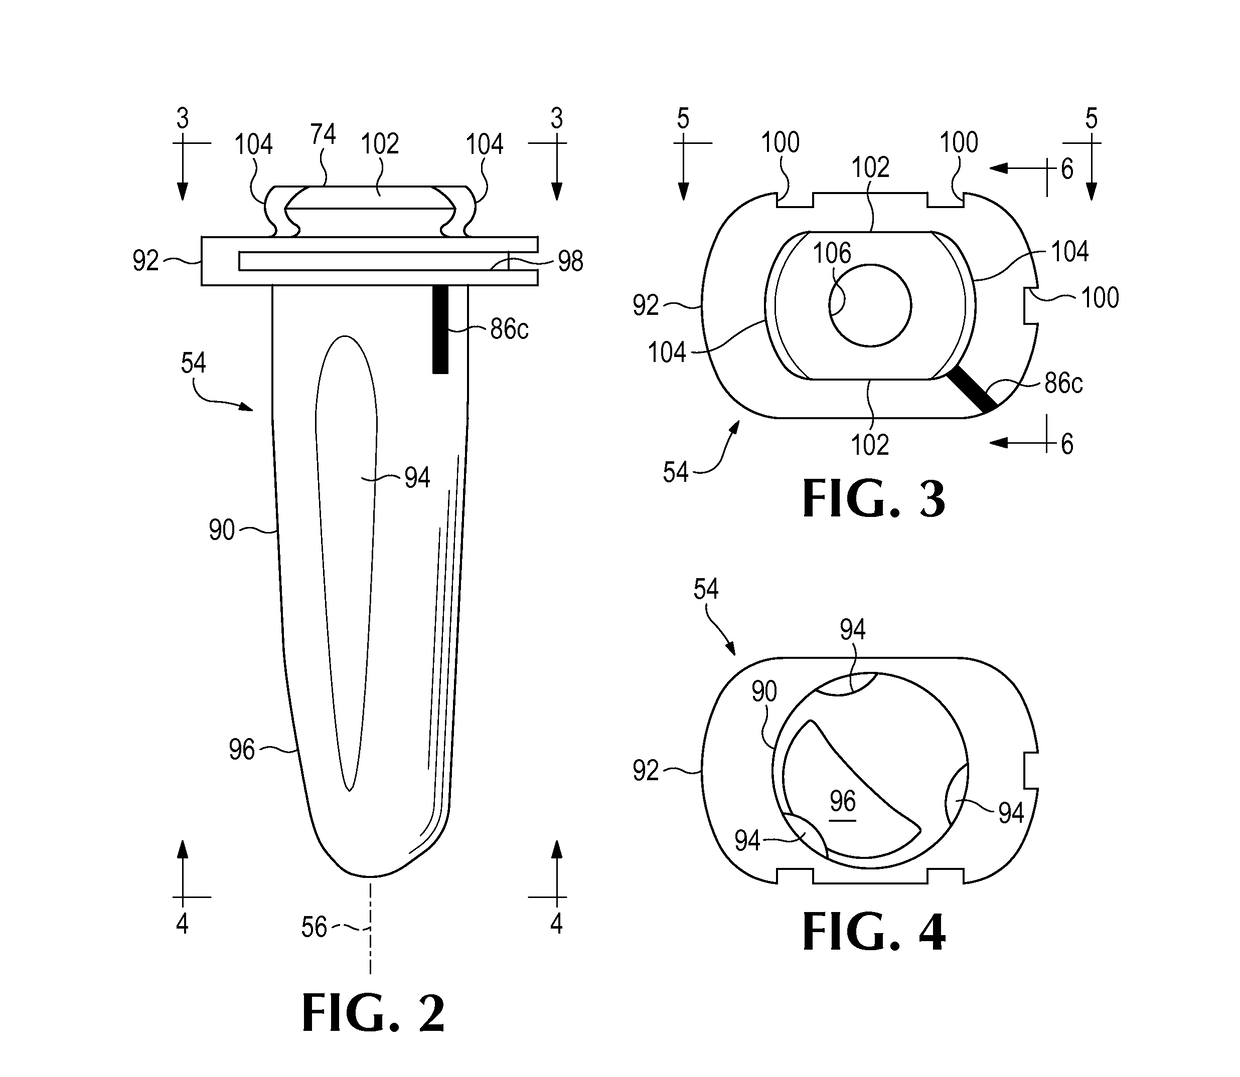 Radial head prosthesis with rotate-to-lock interface